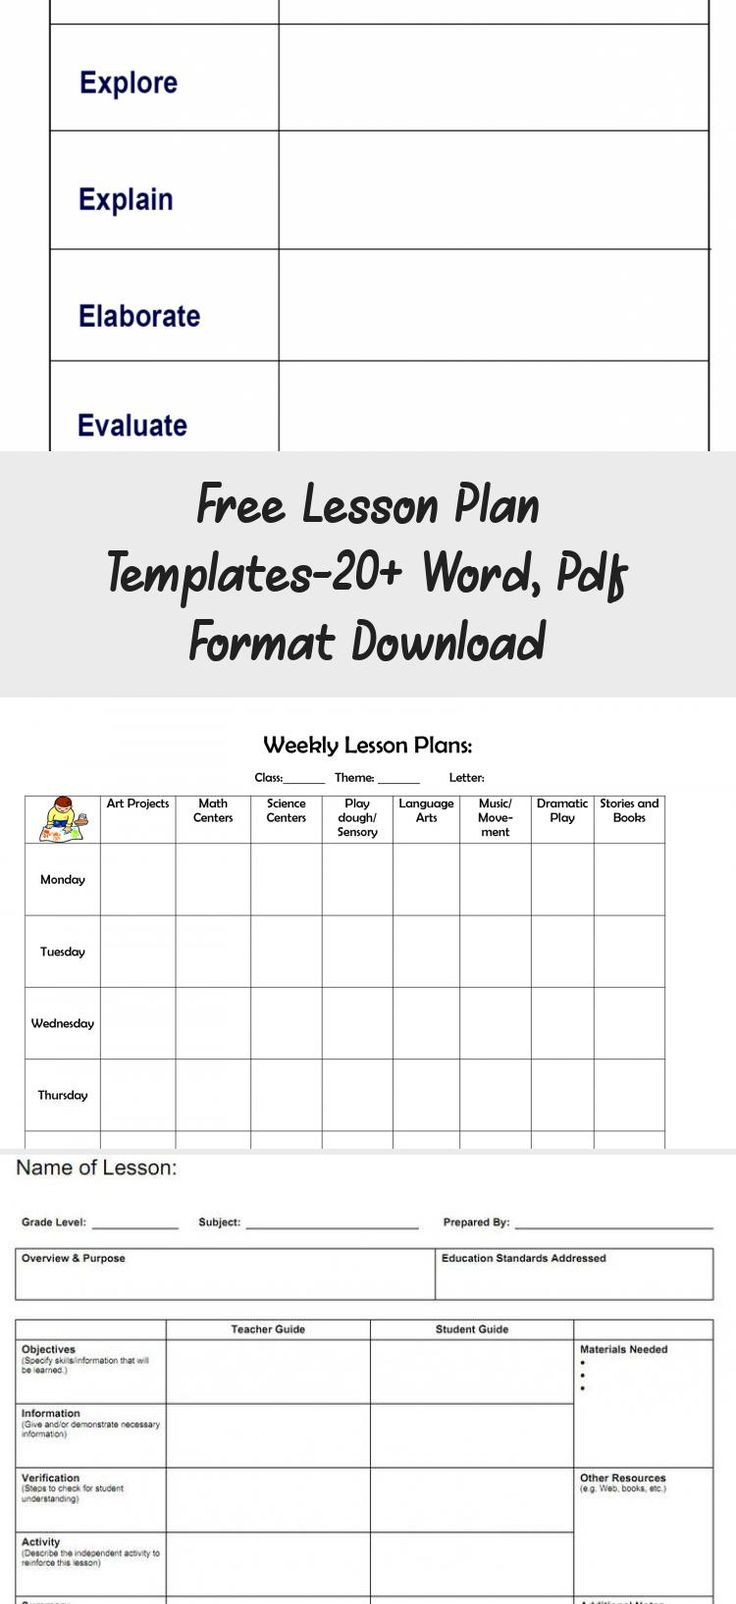 Steps Of Lesson Plan This Pin Demonstrates the Five Step Lesson Plan the